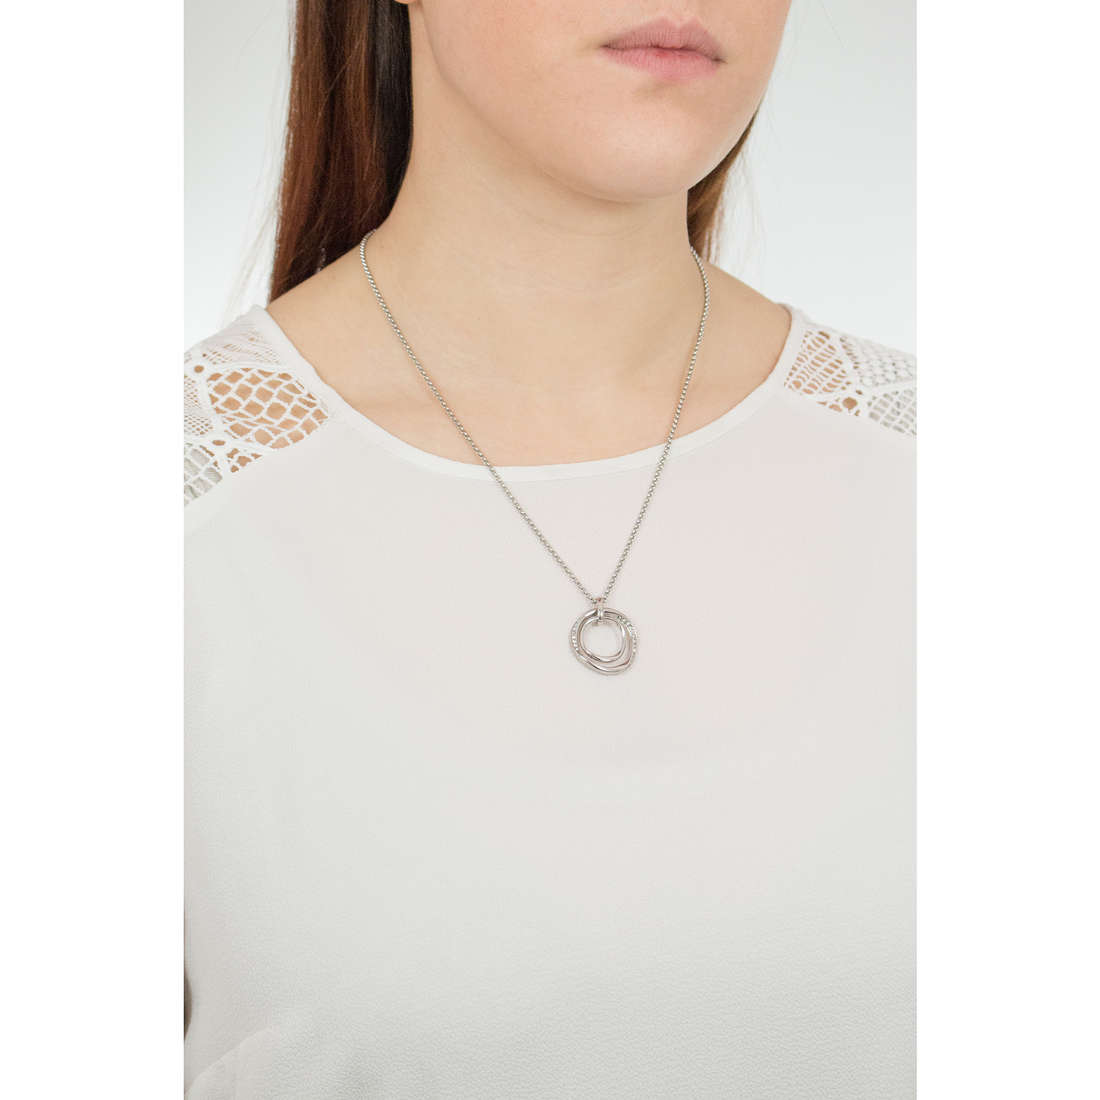 Fossil necklaces woman JF01218040 wearing